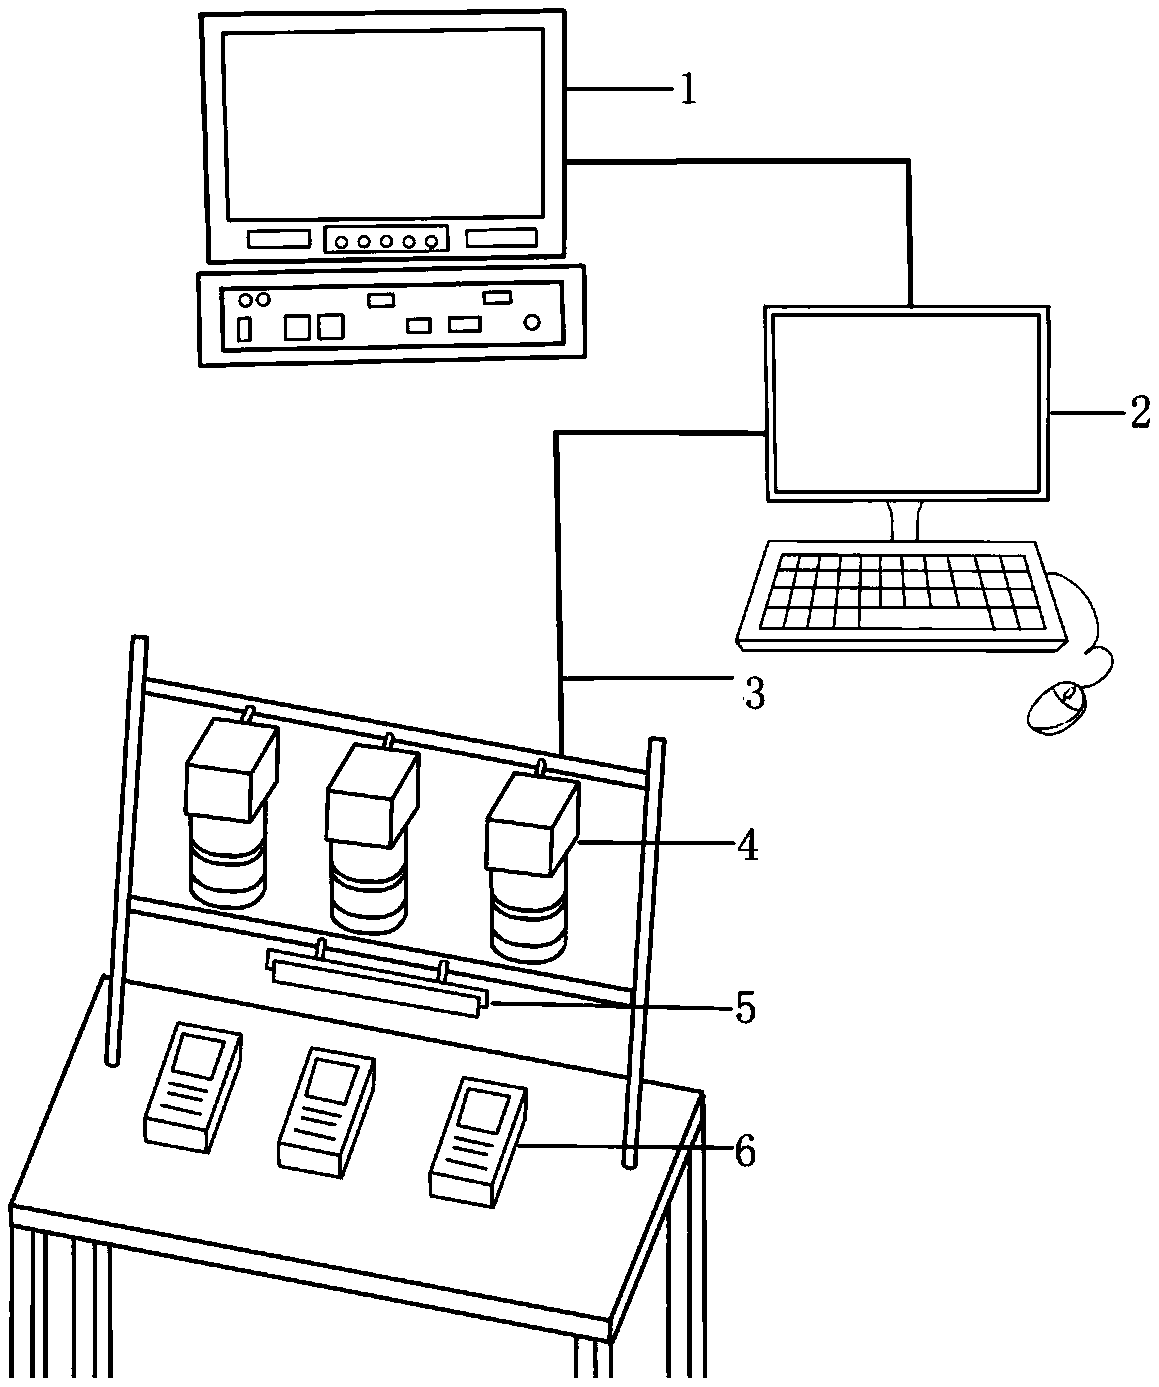 Visual computing-based intelligent detection method and apparatus for appearance and performance of electricity meter